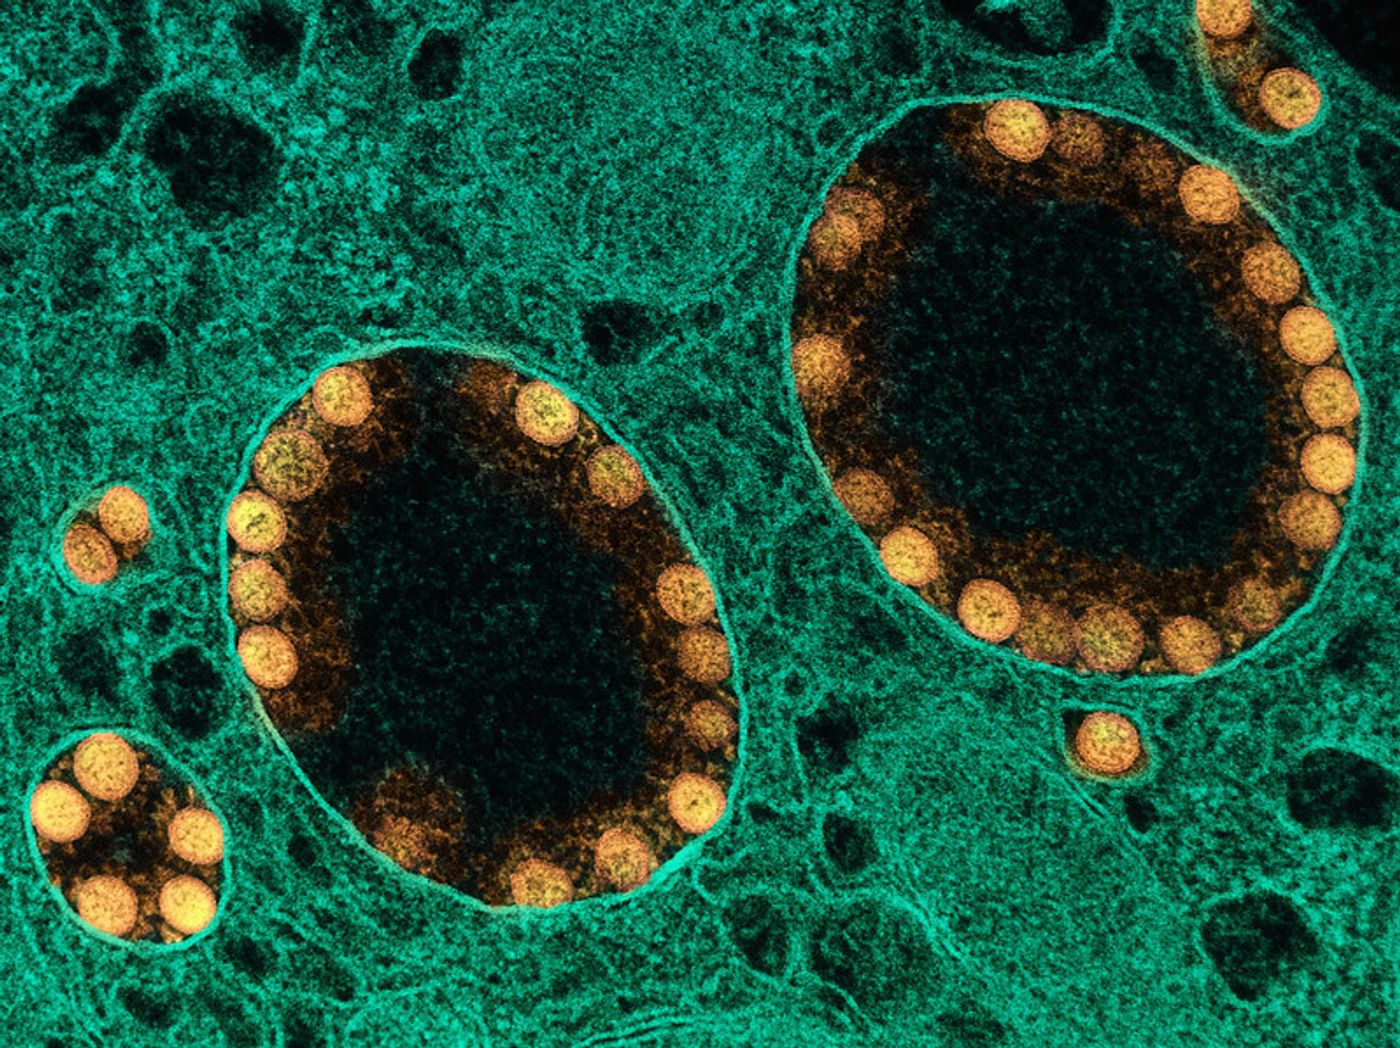 Transmission electron micrograph of SARS-CoV-2 virus particles (gold) within endosomes of a heavily infected nasal Olfactory Epithelial Cell. Image captured at the NIAID Integrated Research Facility (IRF) in Fort Detrick, Maryland. Credit: NIAID